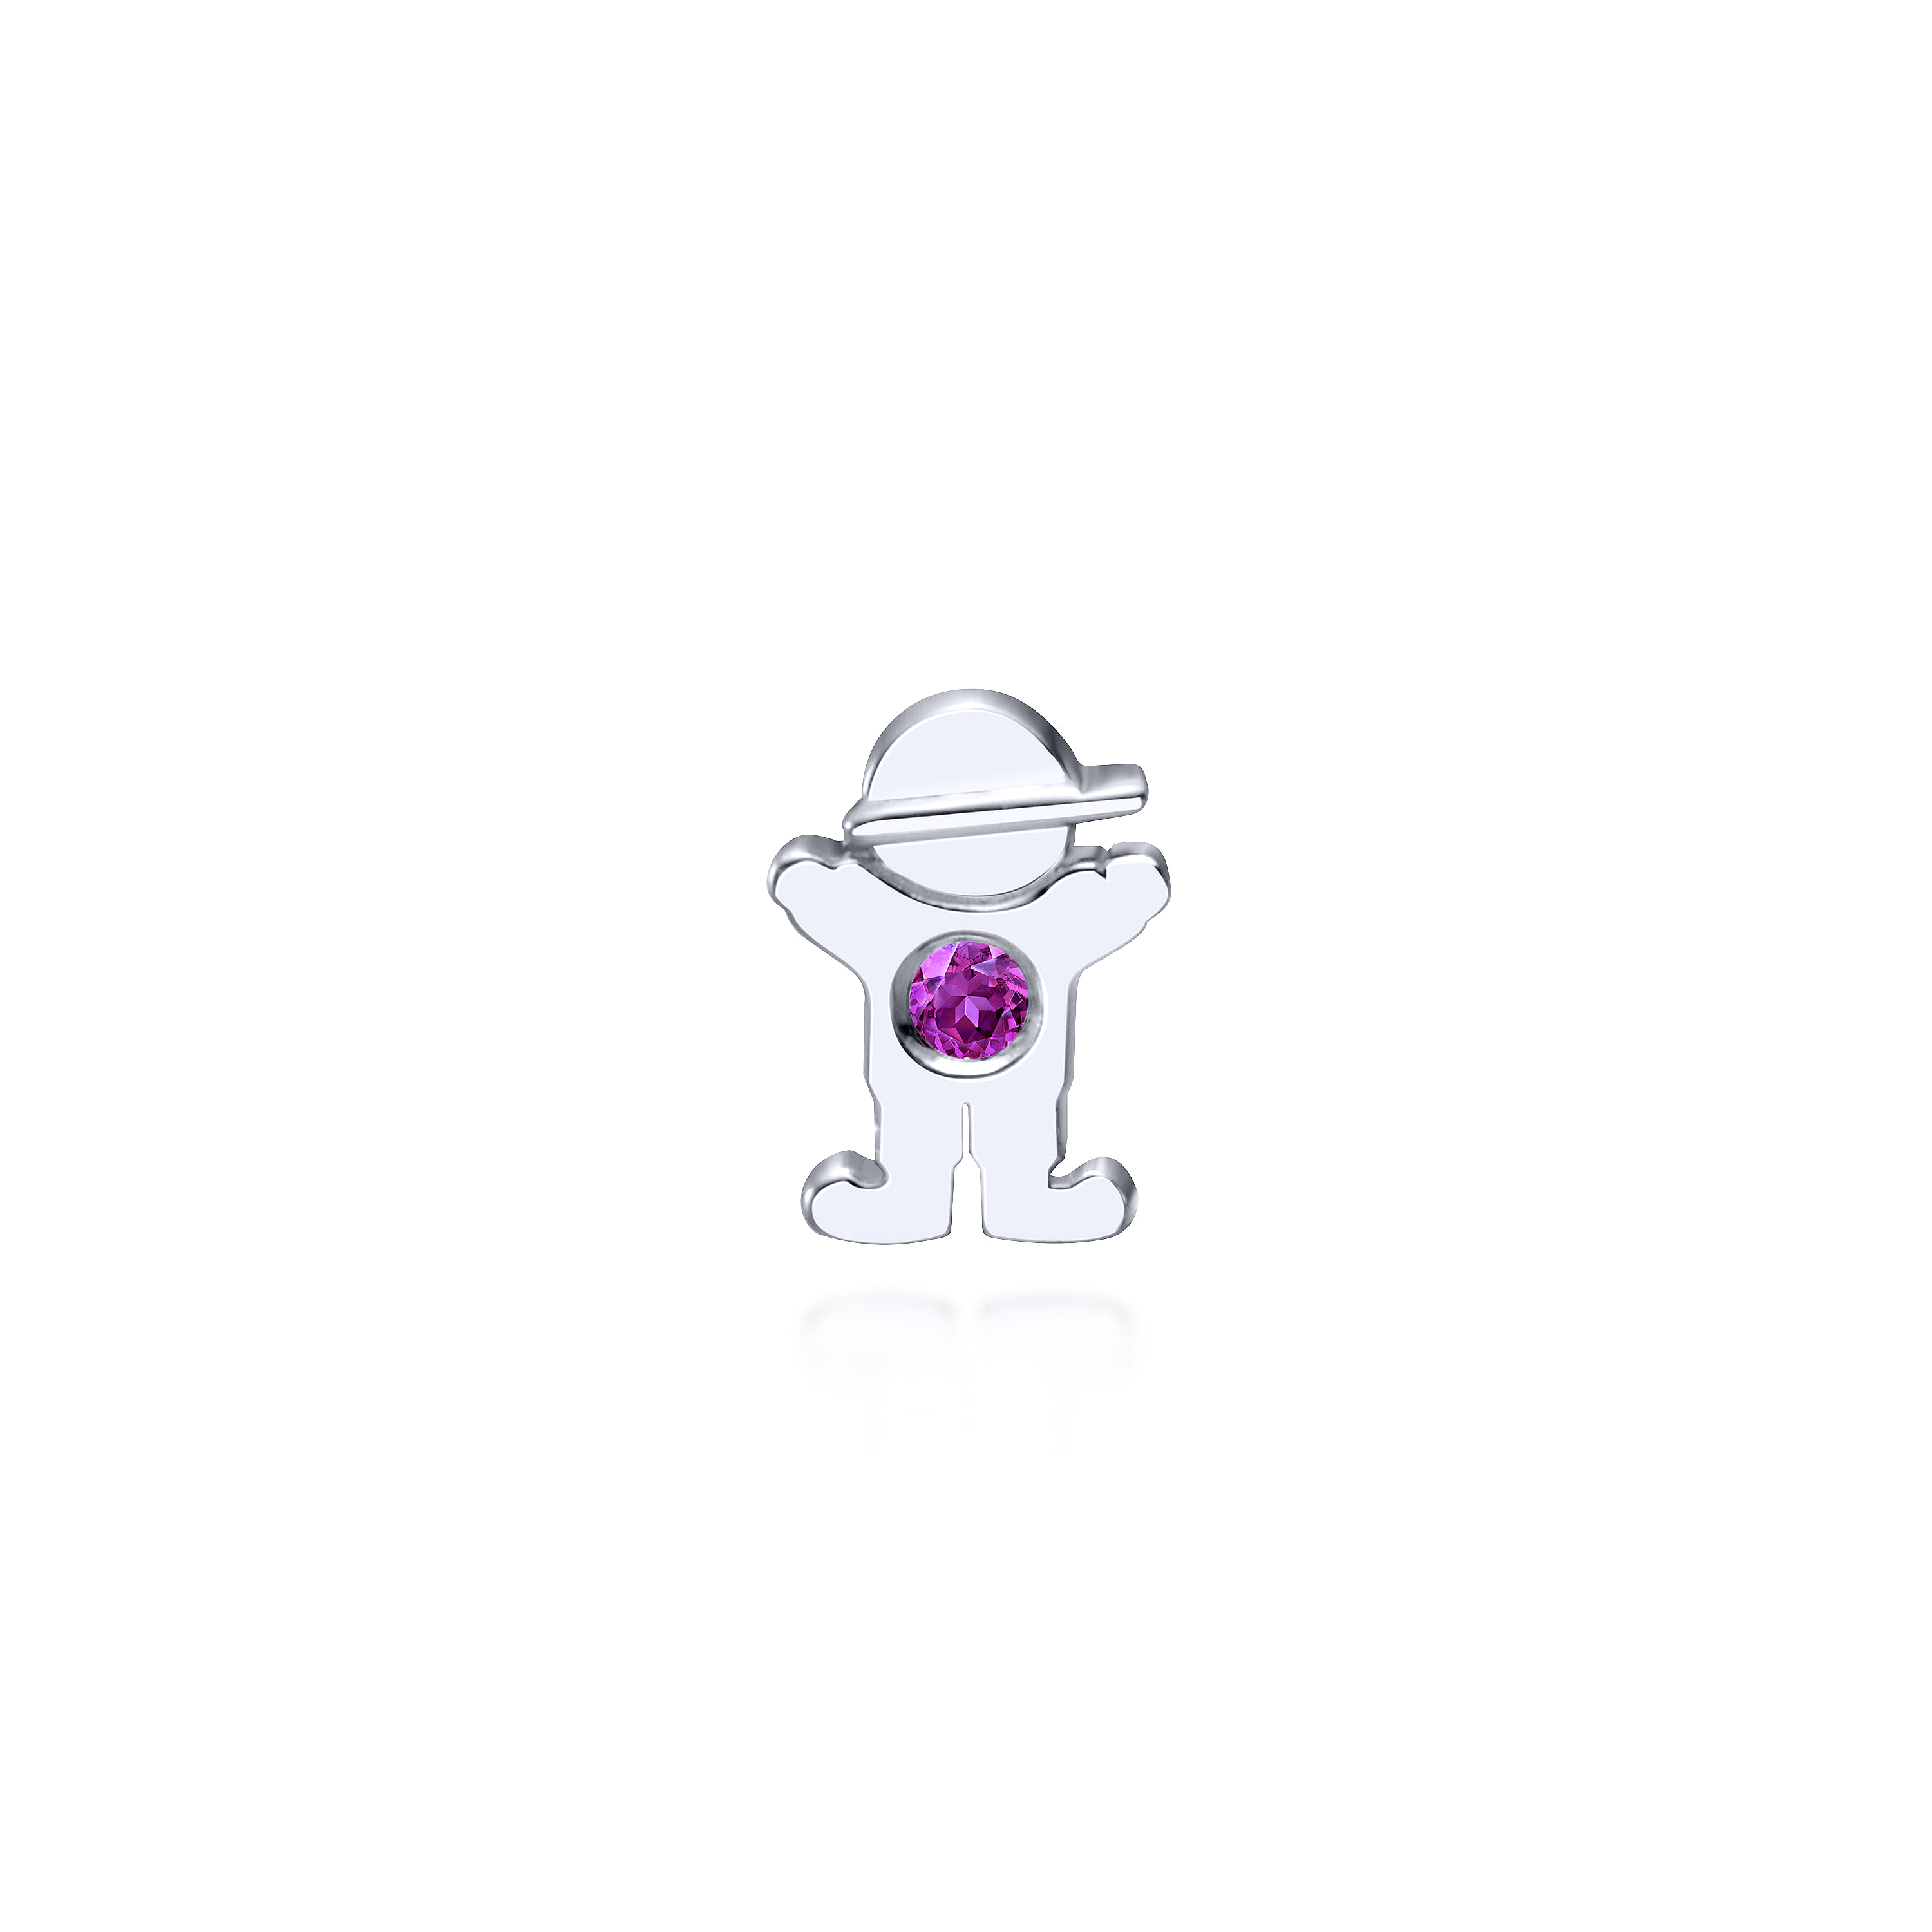 925 Sterling Silver Little Boy Pendant with Amethyst Stone